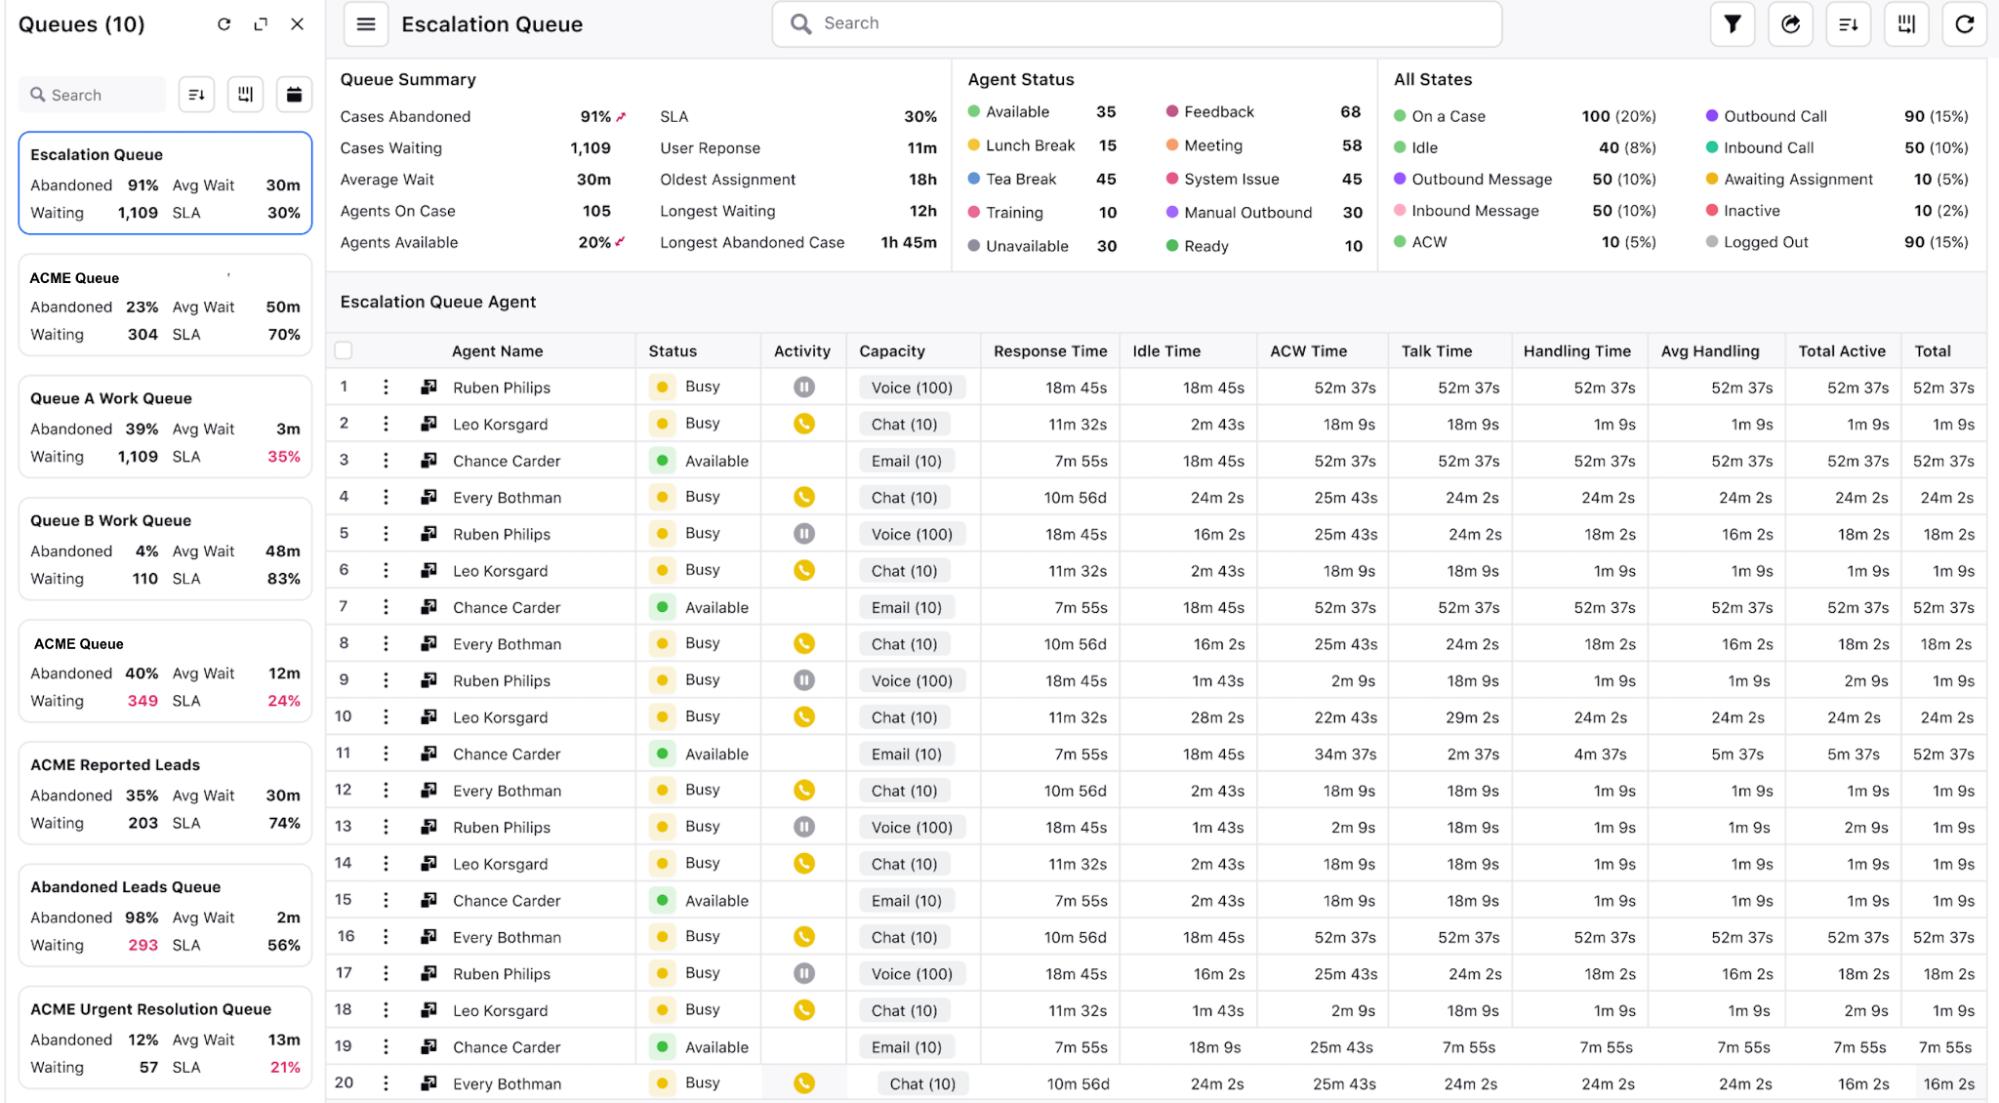 A Sprinklr Service screenshot showing the product's live monitoring capabilities.